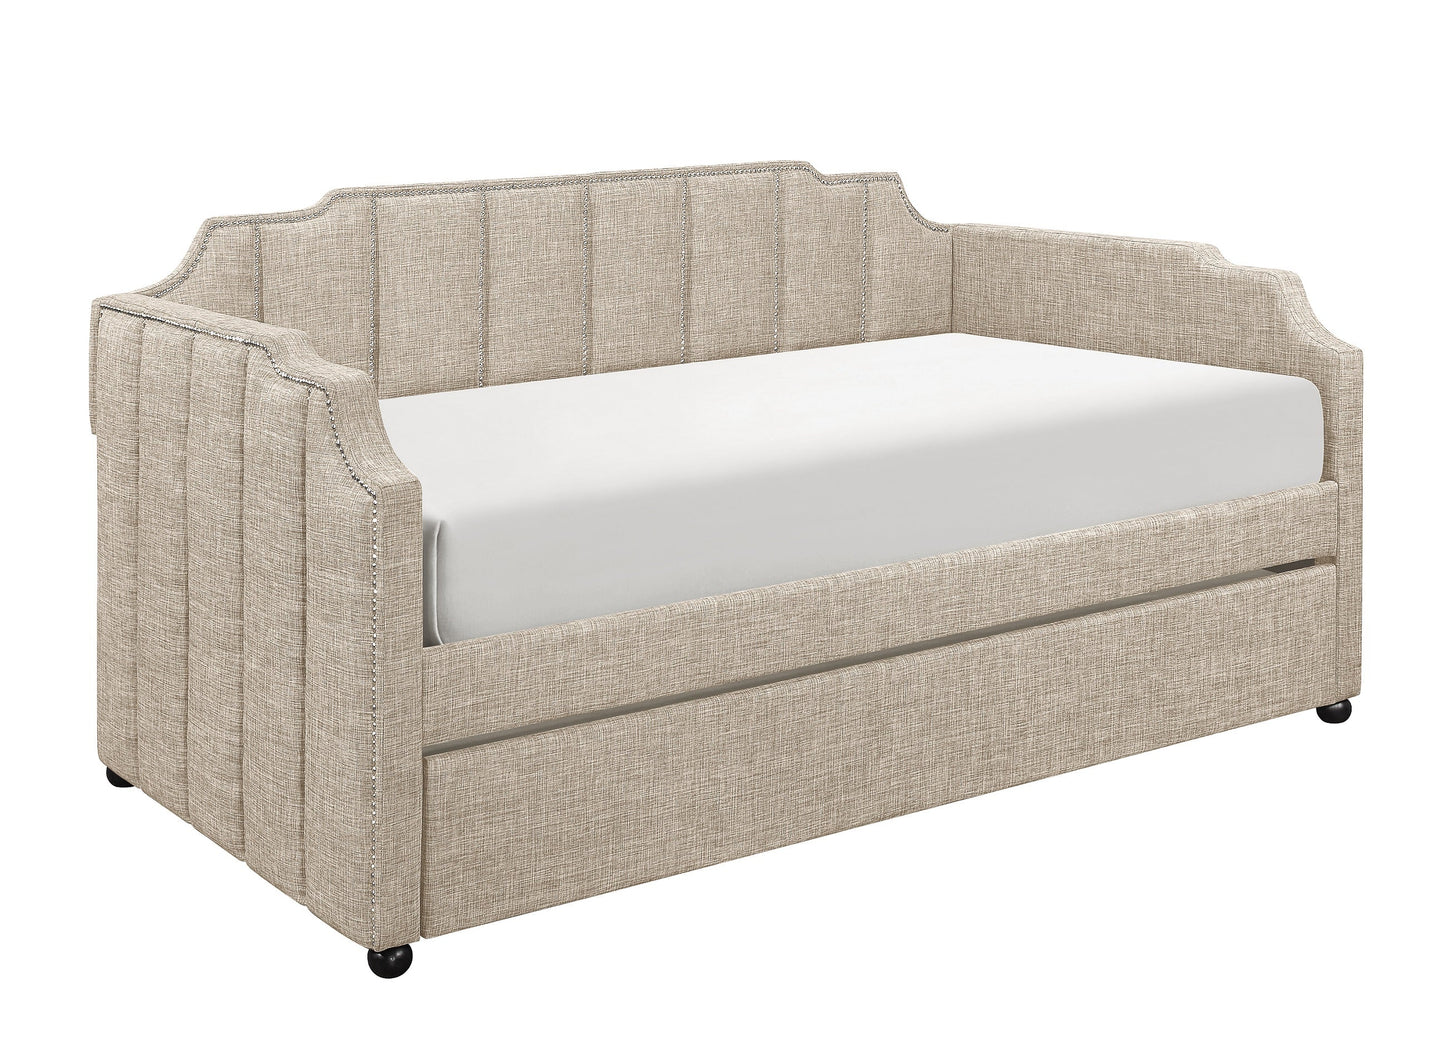 Aisha Beige Daybed with Trundle